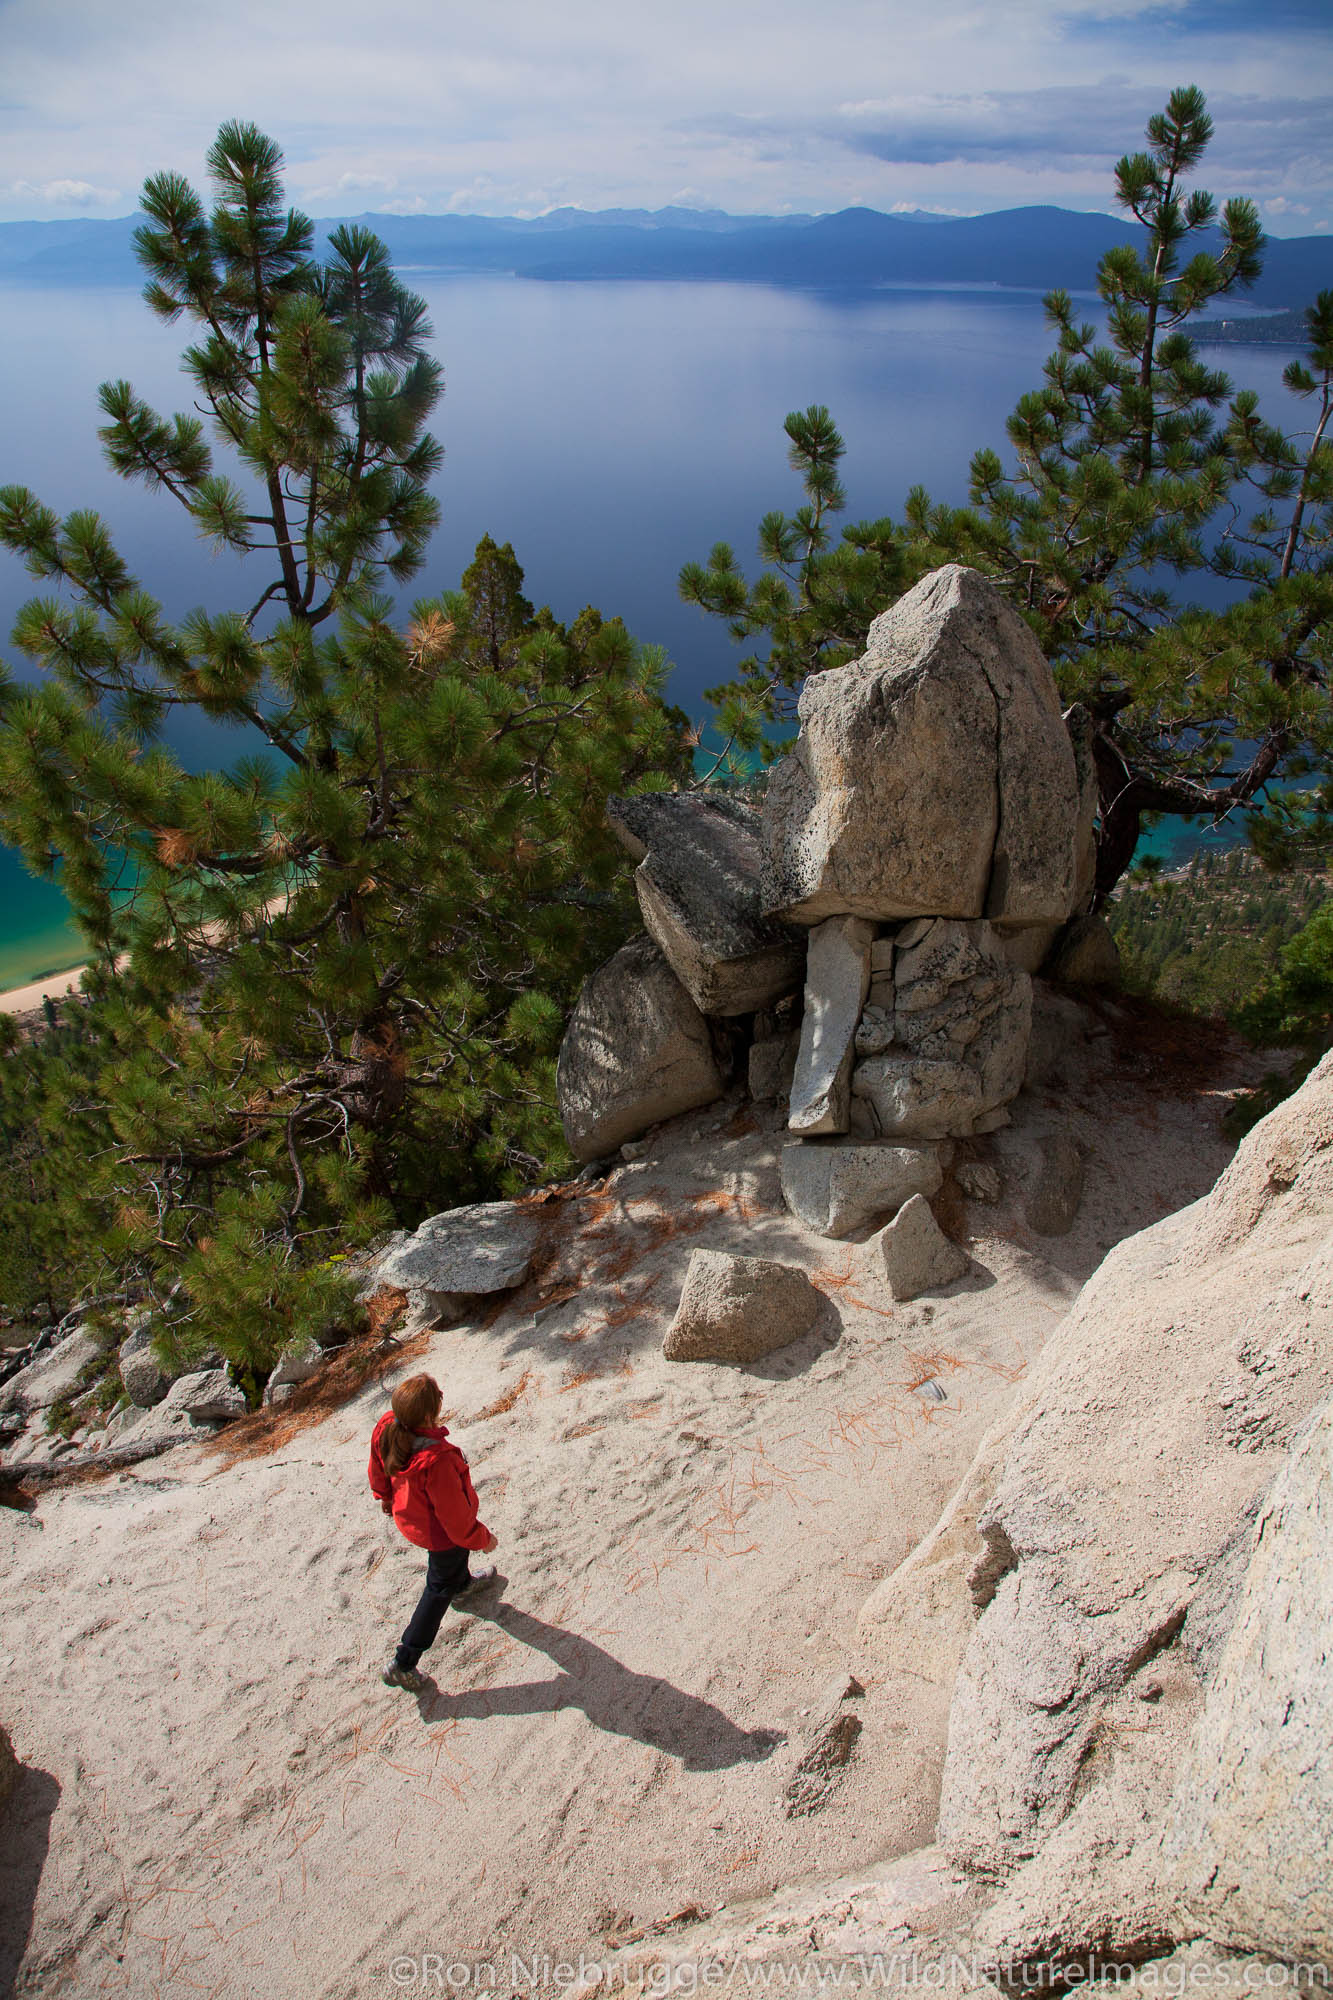 Hiking on the Flume Trail, Lake Tahoe, NV (model released)